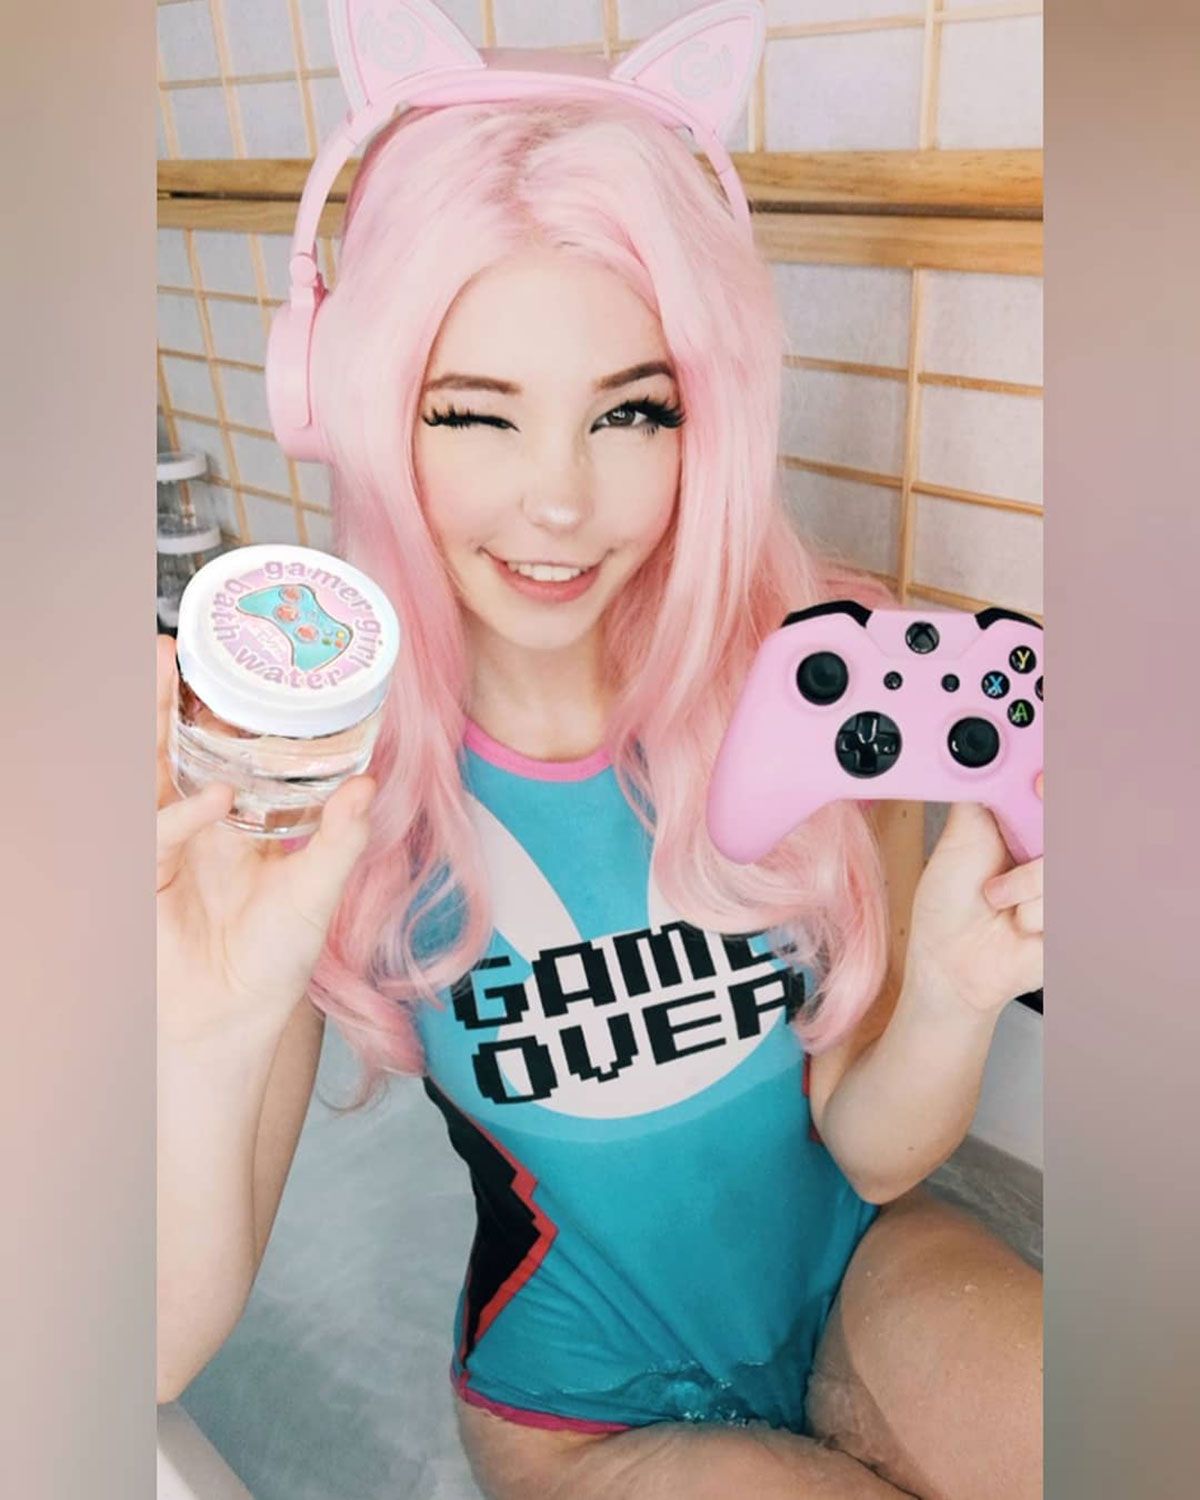 Watch: Gamer girl Belle Delphine wants to sell you her bath water